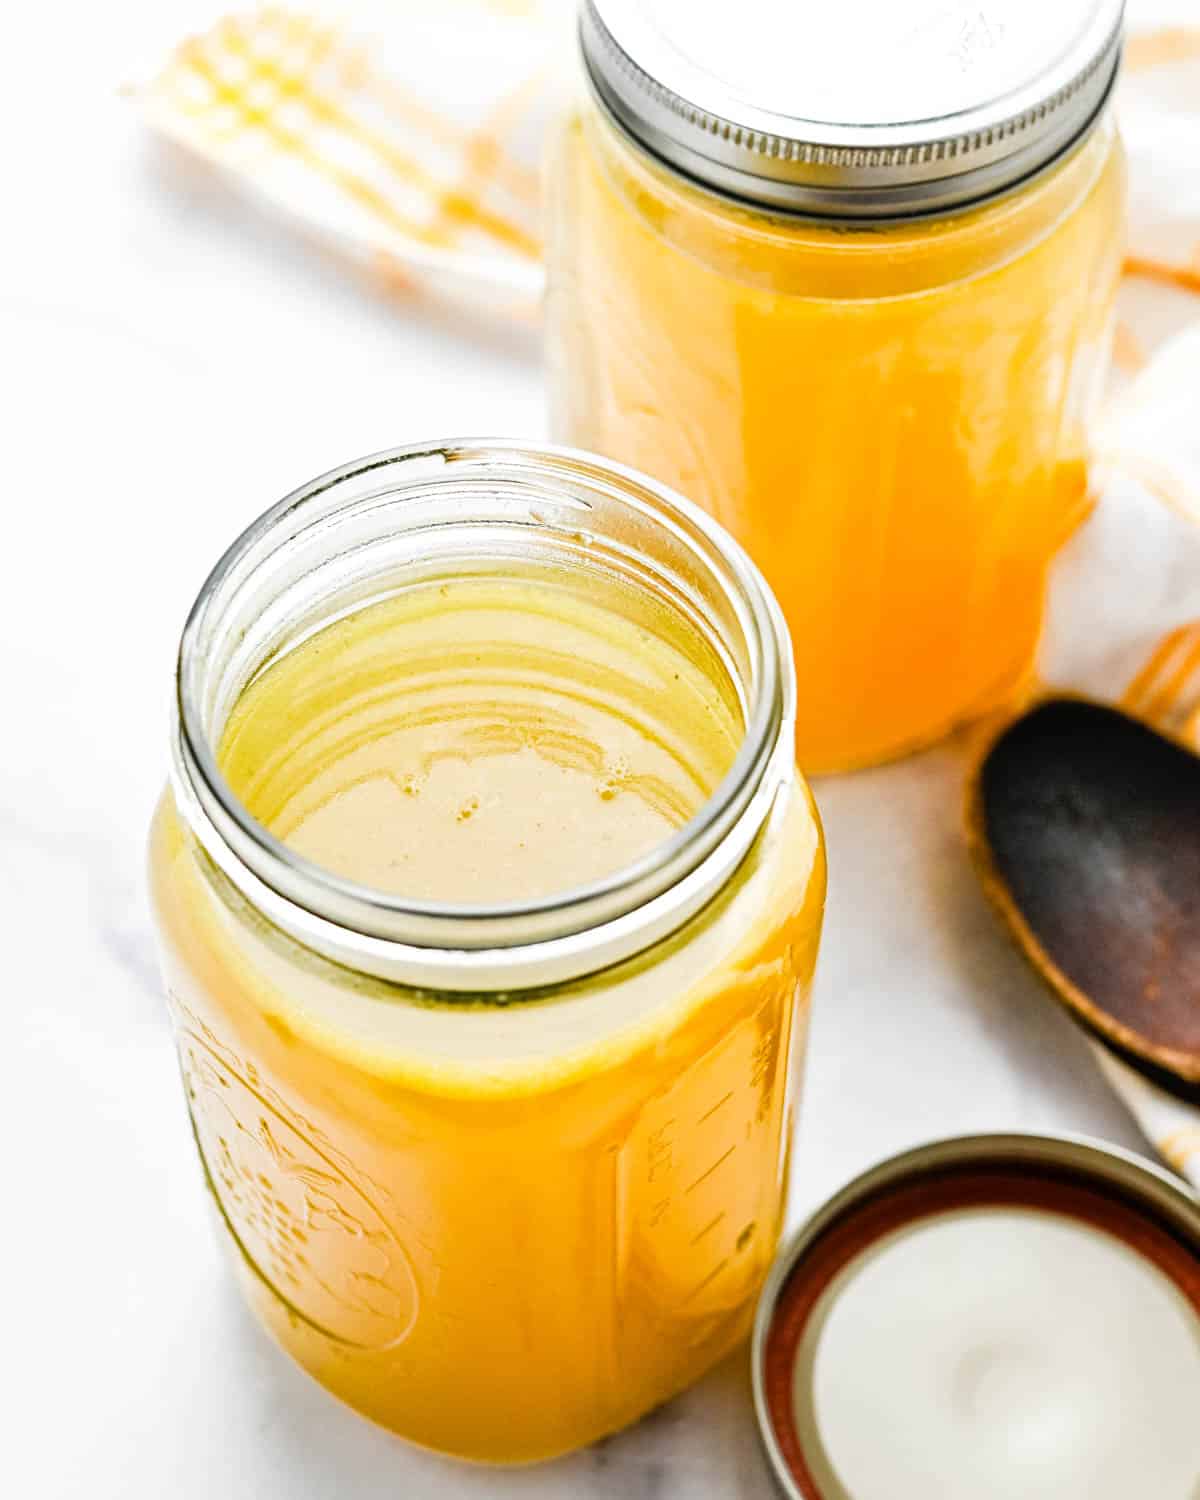 Easy Homemade Turkey Stock From Thanksgiving Leftovers - Garlic and Zest